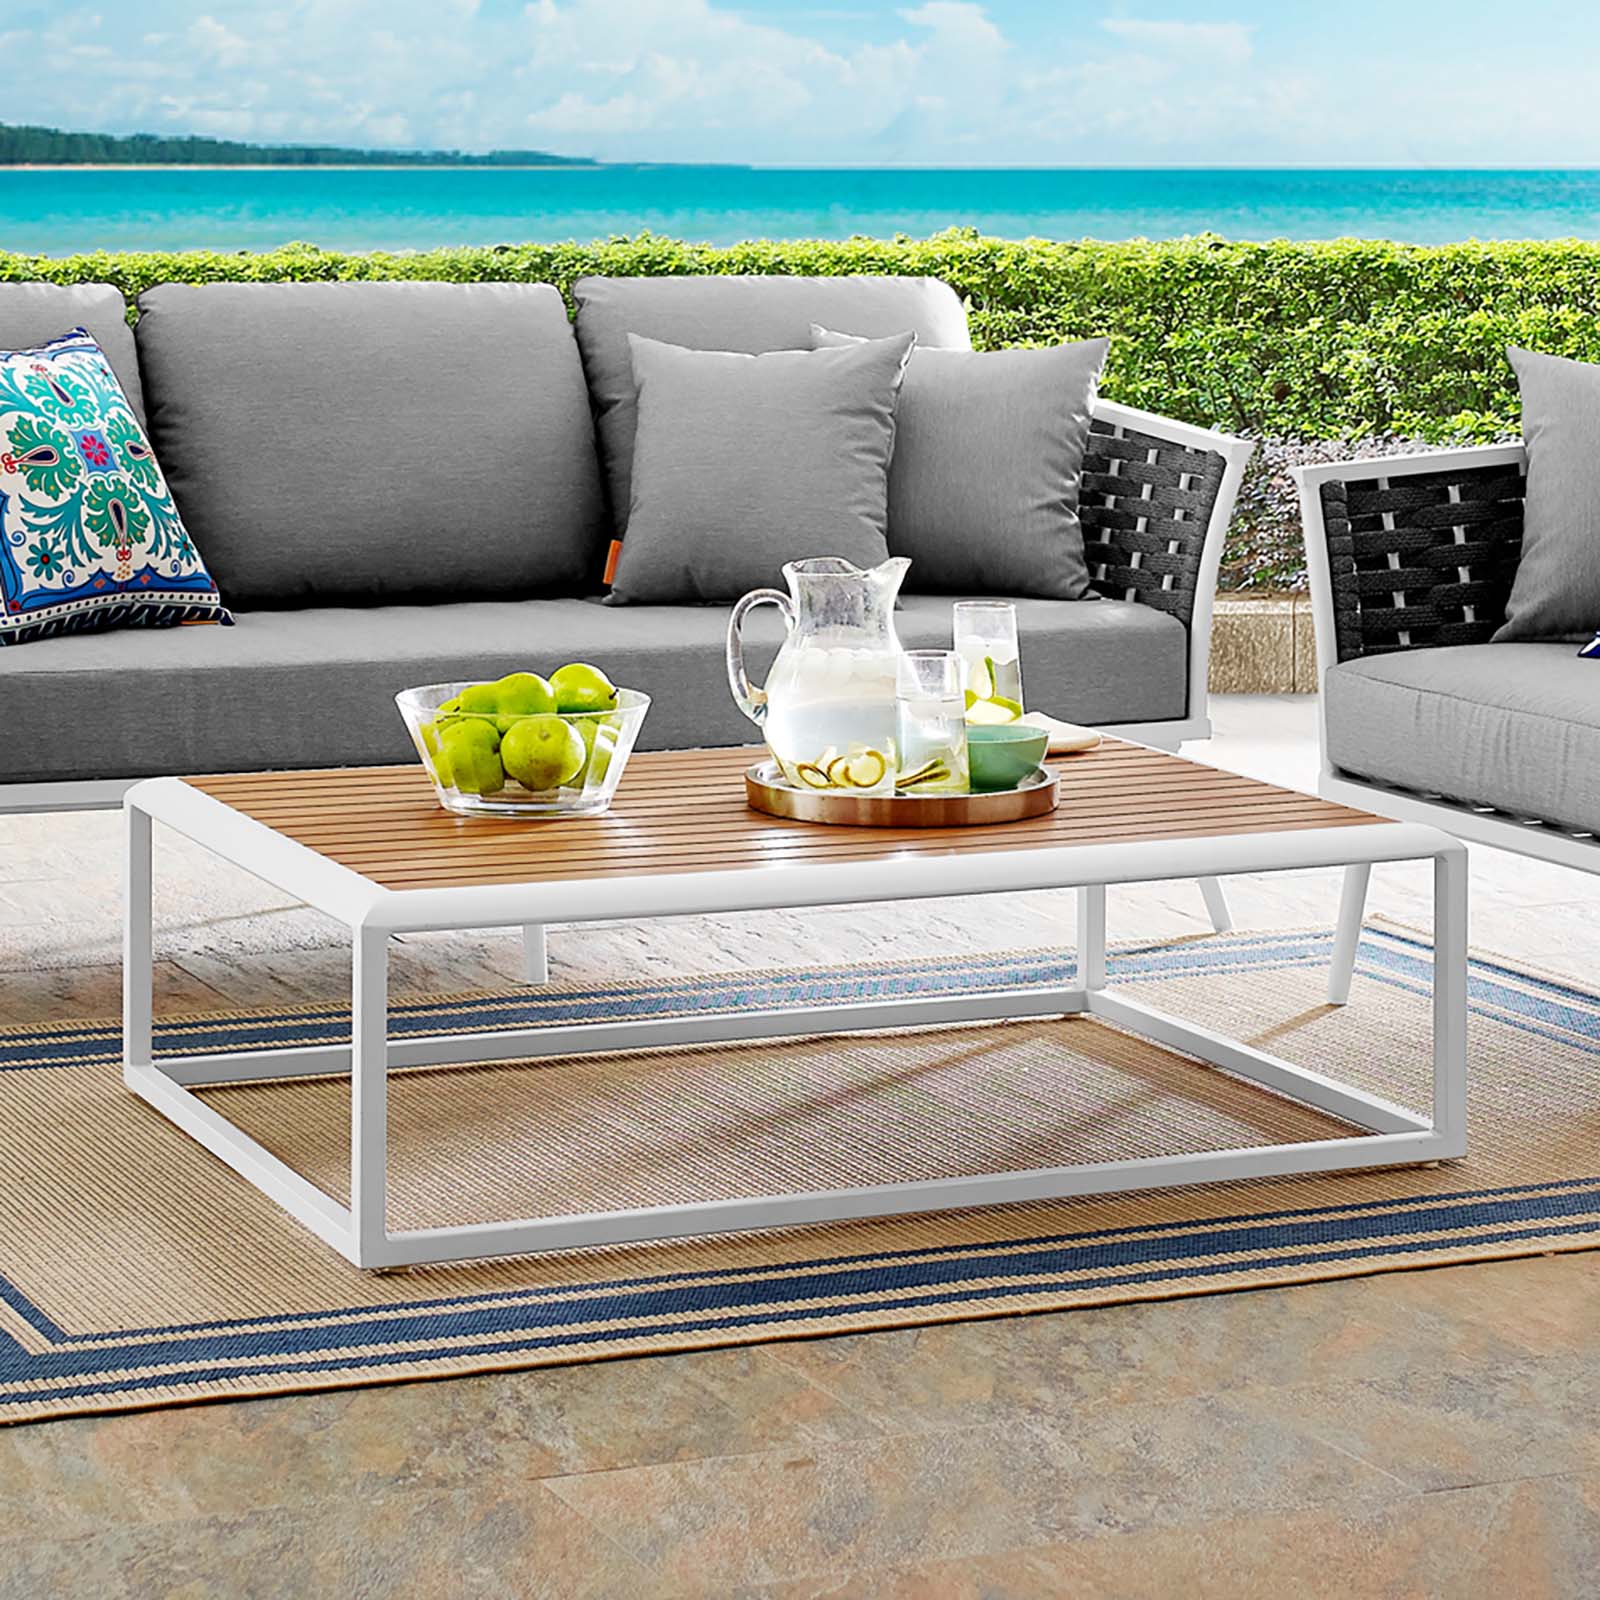 Stance Outdoor Patio Aluminum Coffee Table - East Shore Modern Home Furnishings